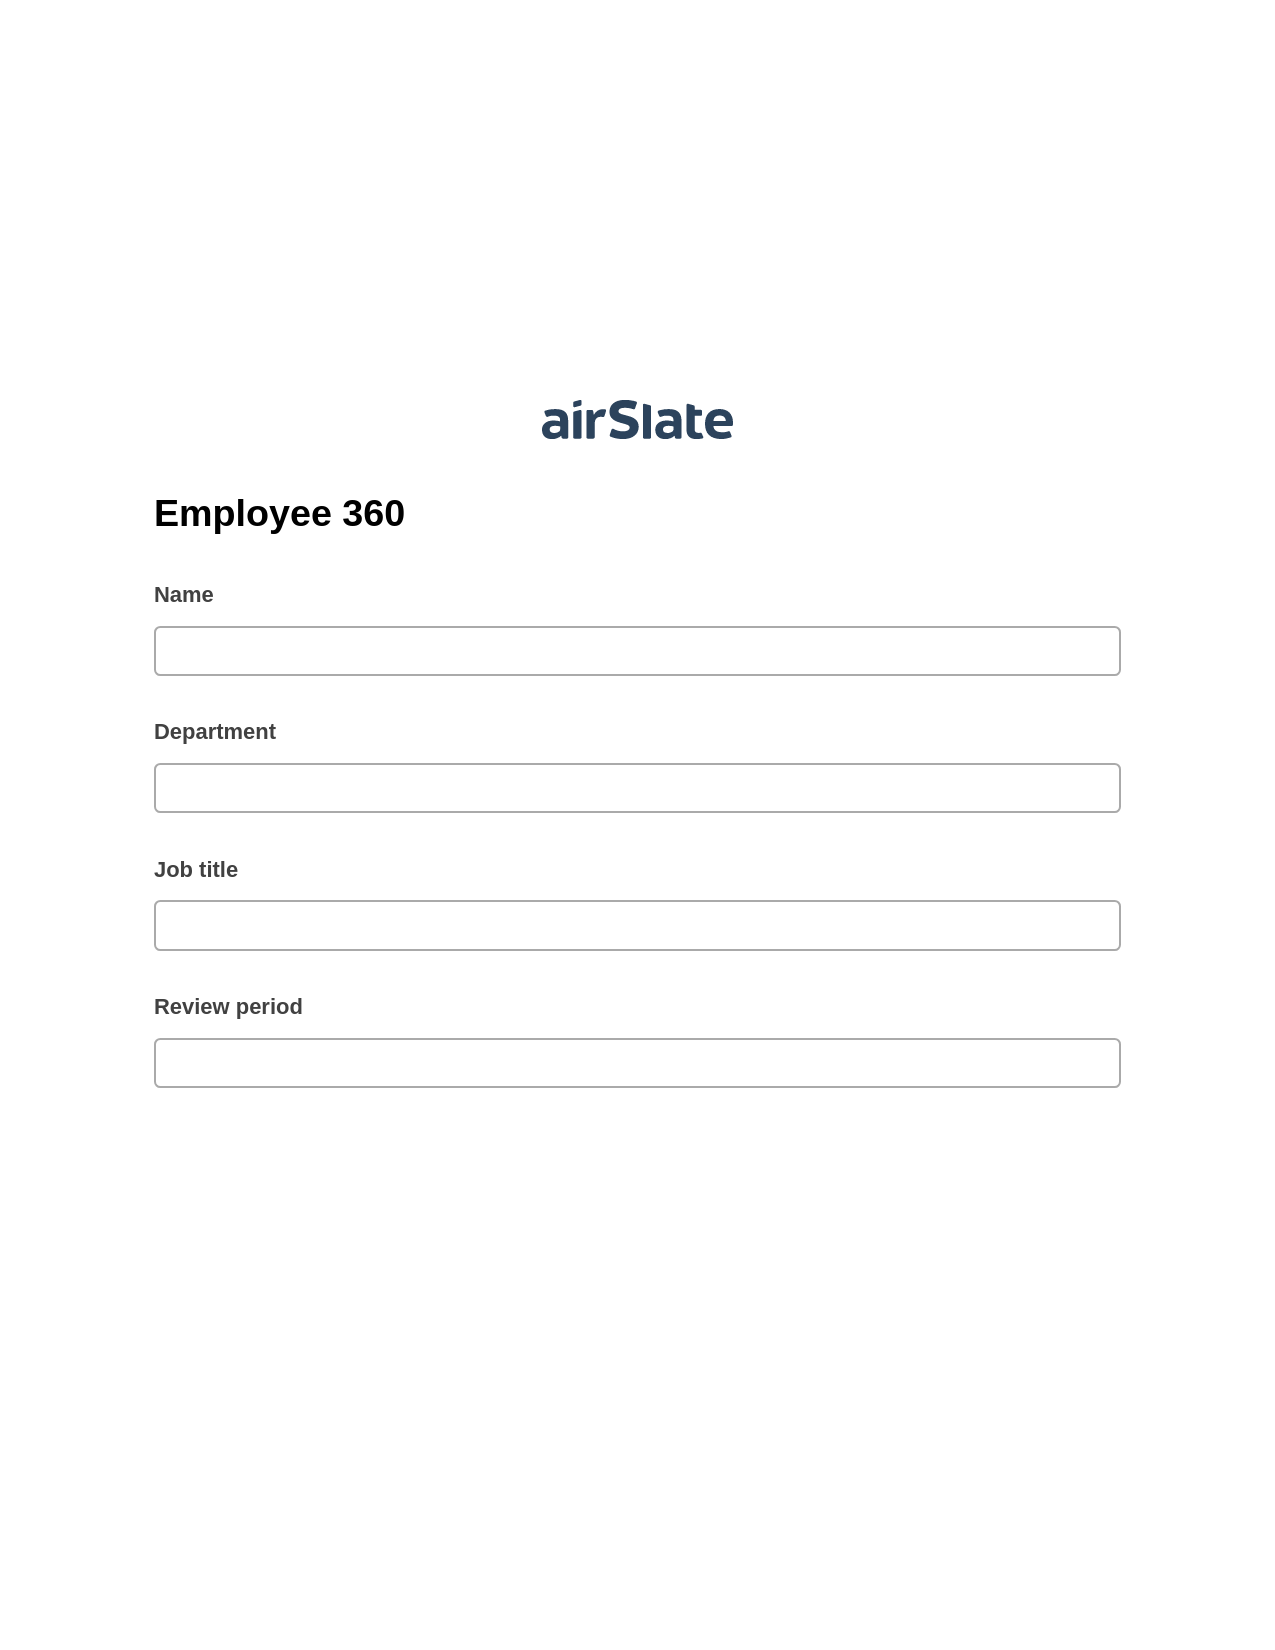 Multirole Employee 360 Pre-fill from Google Sheets Bot, Create MS Dynamics 365 Records Bot, Export to WebMerge Bot